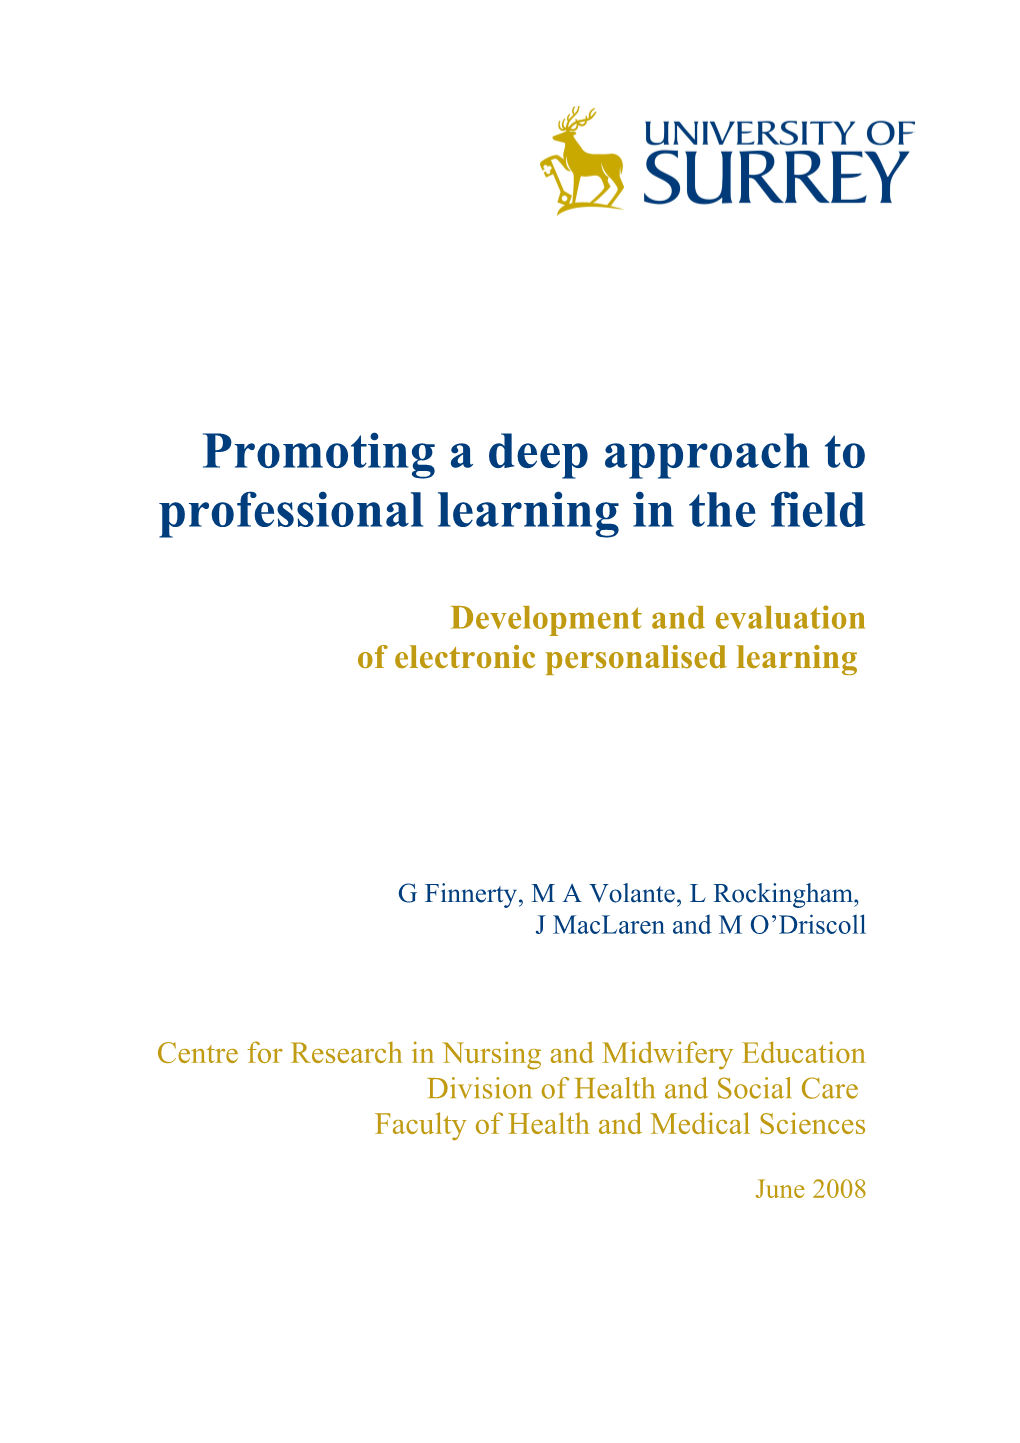 Promoting a Deep Approach to Professional Learning in the Field